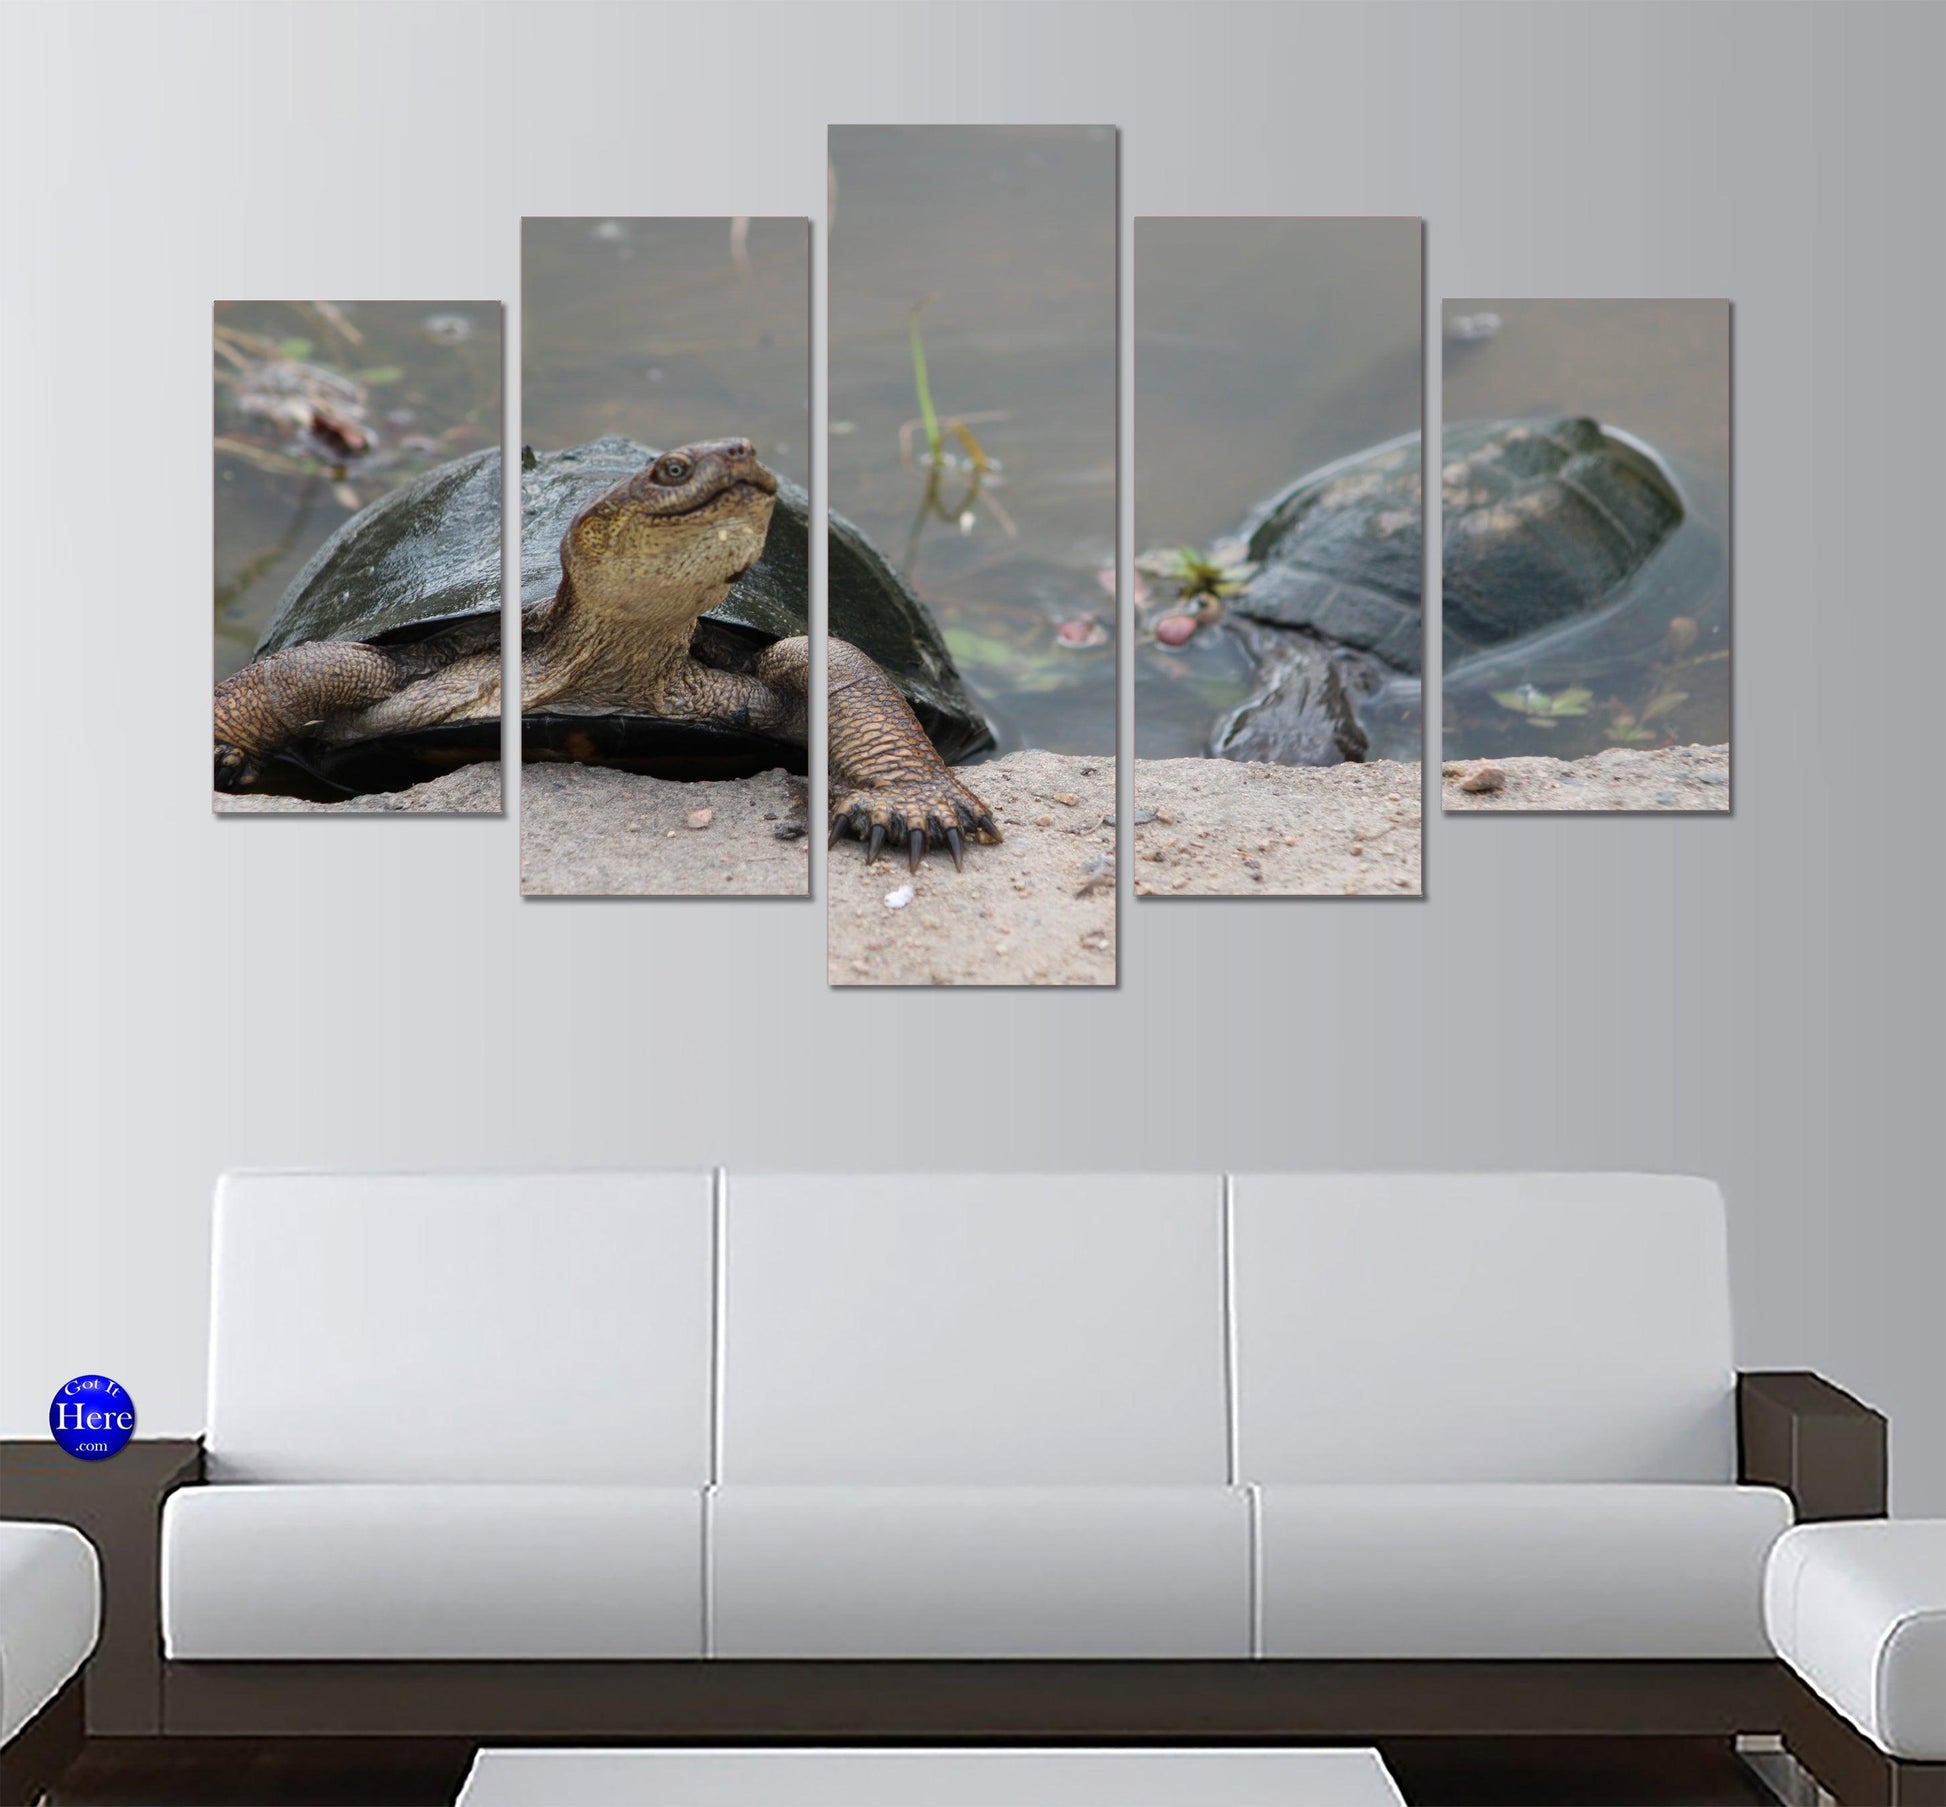 Terrapins In A Pond 5 Panel Canvas Print Wall Art - GotItHere.com